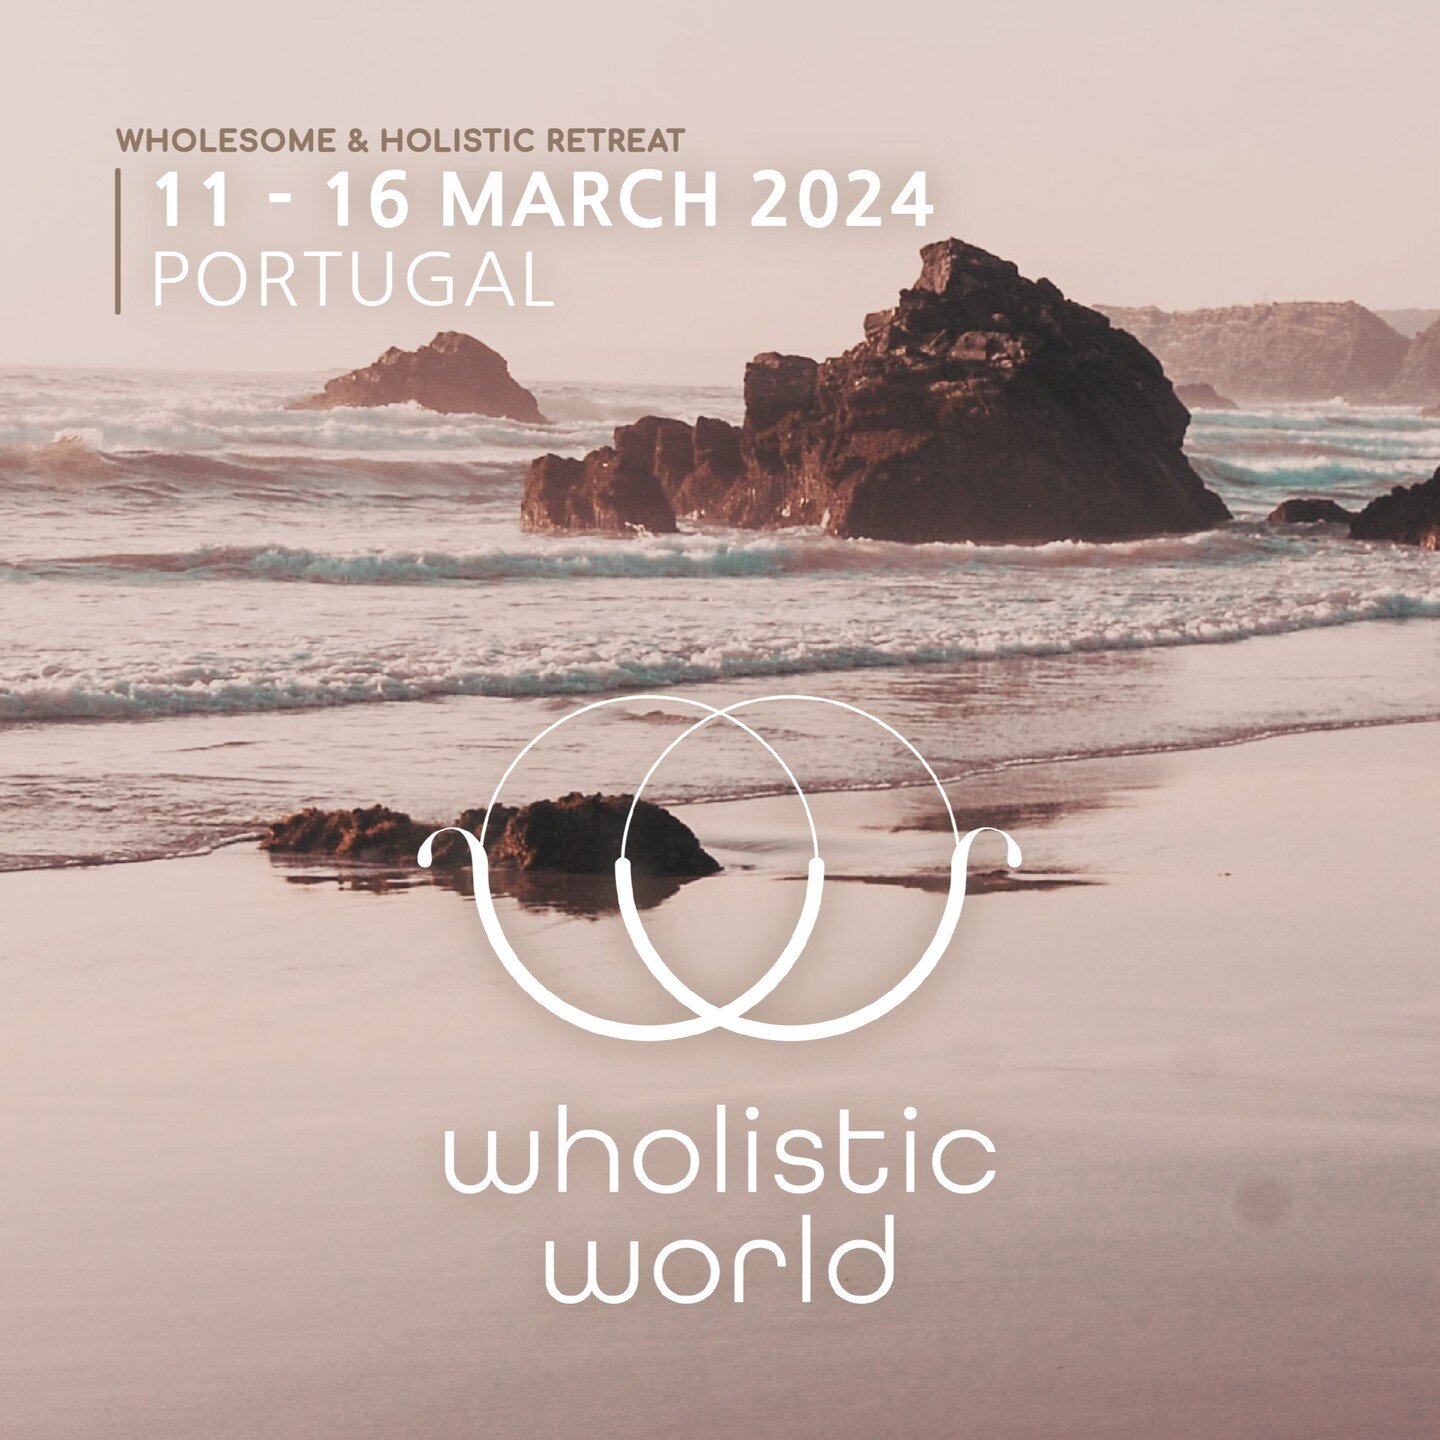 Will you join us in Portugal this March?